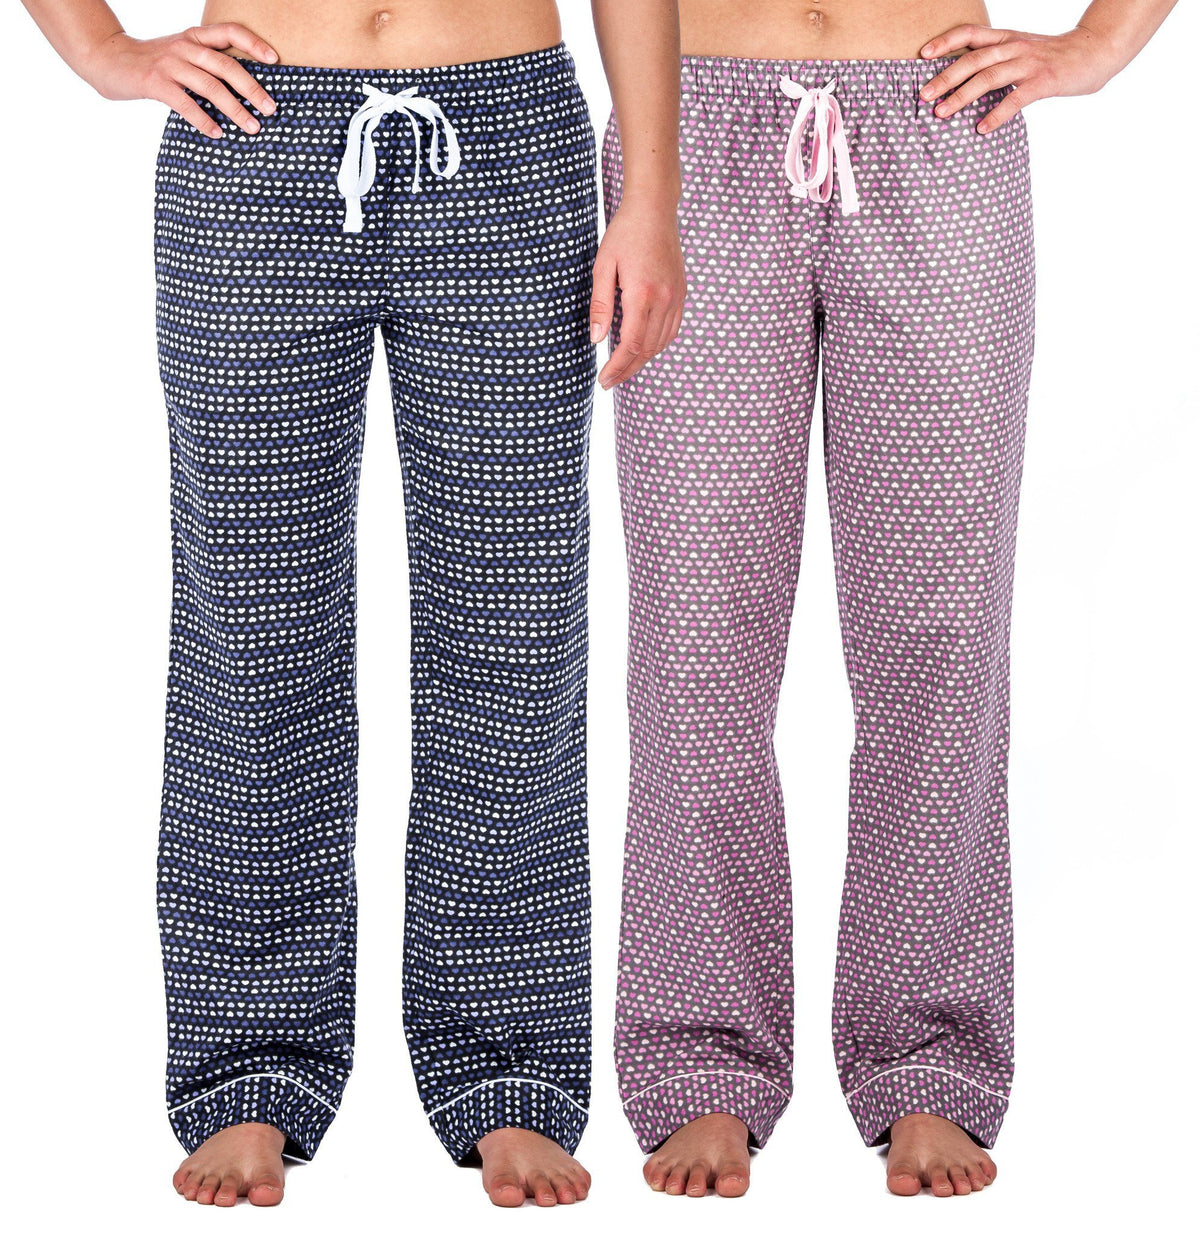 Women's 100% Cotton Flannel Lounge Pants (2-Pack) - Relaxed Fit - Hearts Pink/Blue